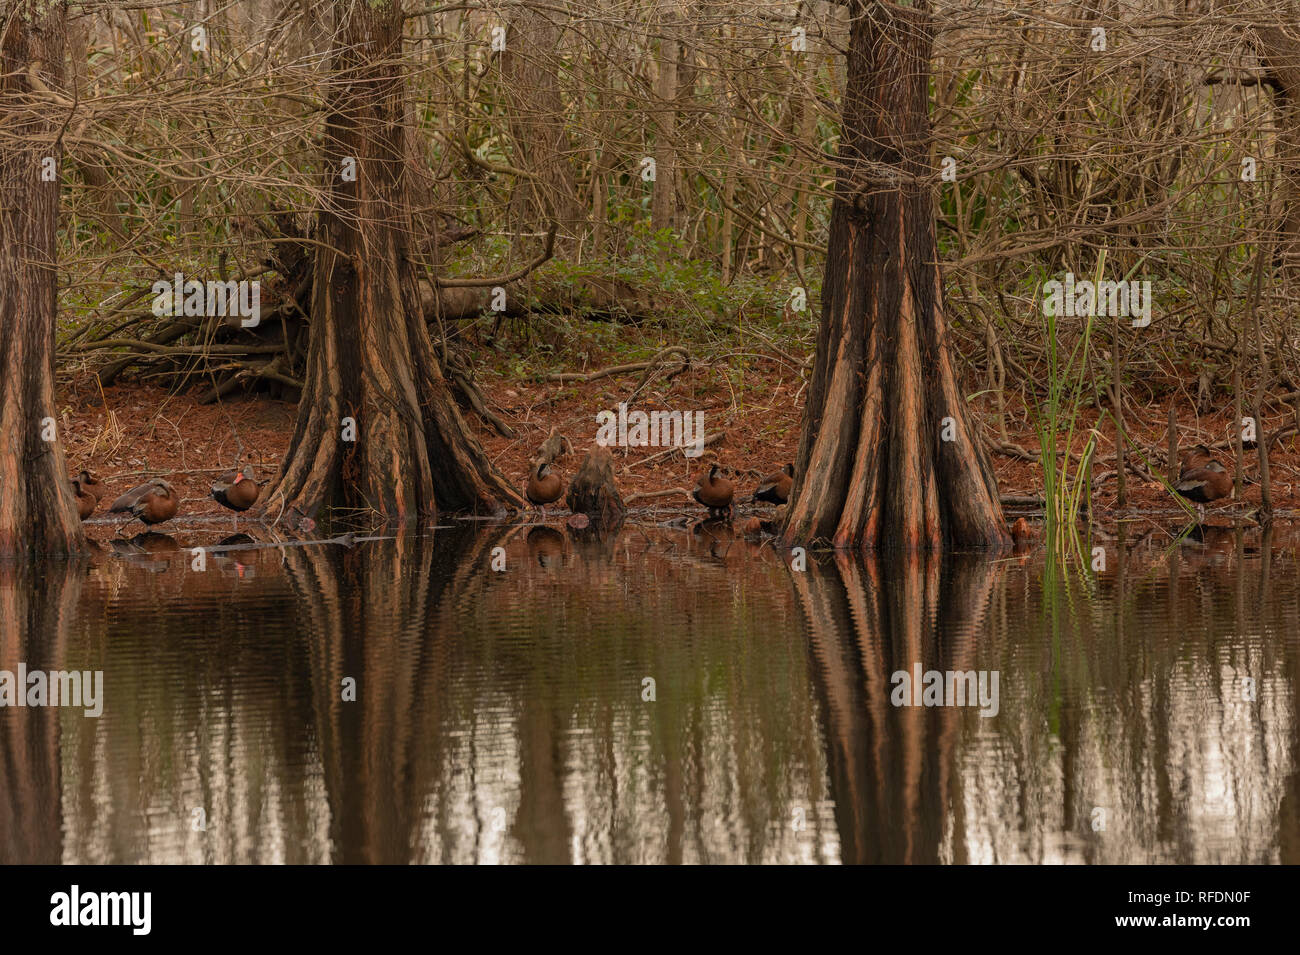 Trunks of Bald Cypress, Taxodium distichum, with black-bellied whistling ducks, and reflections; in Brazos Bend State Park, Texas. Stock Photo